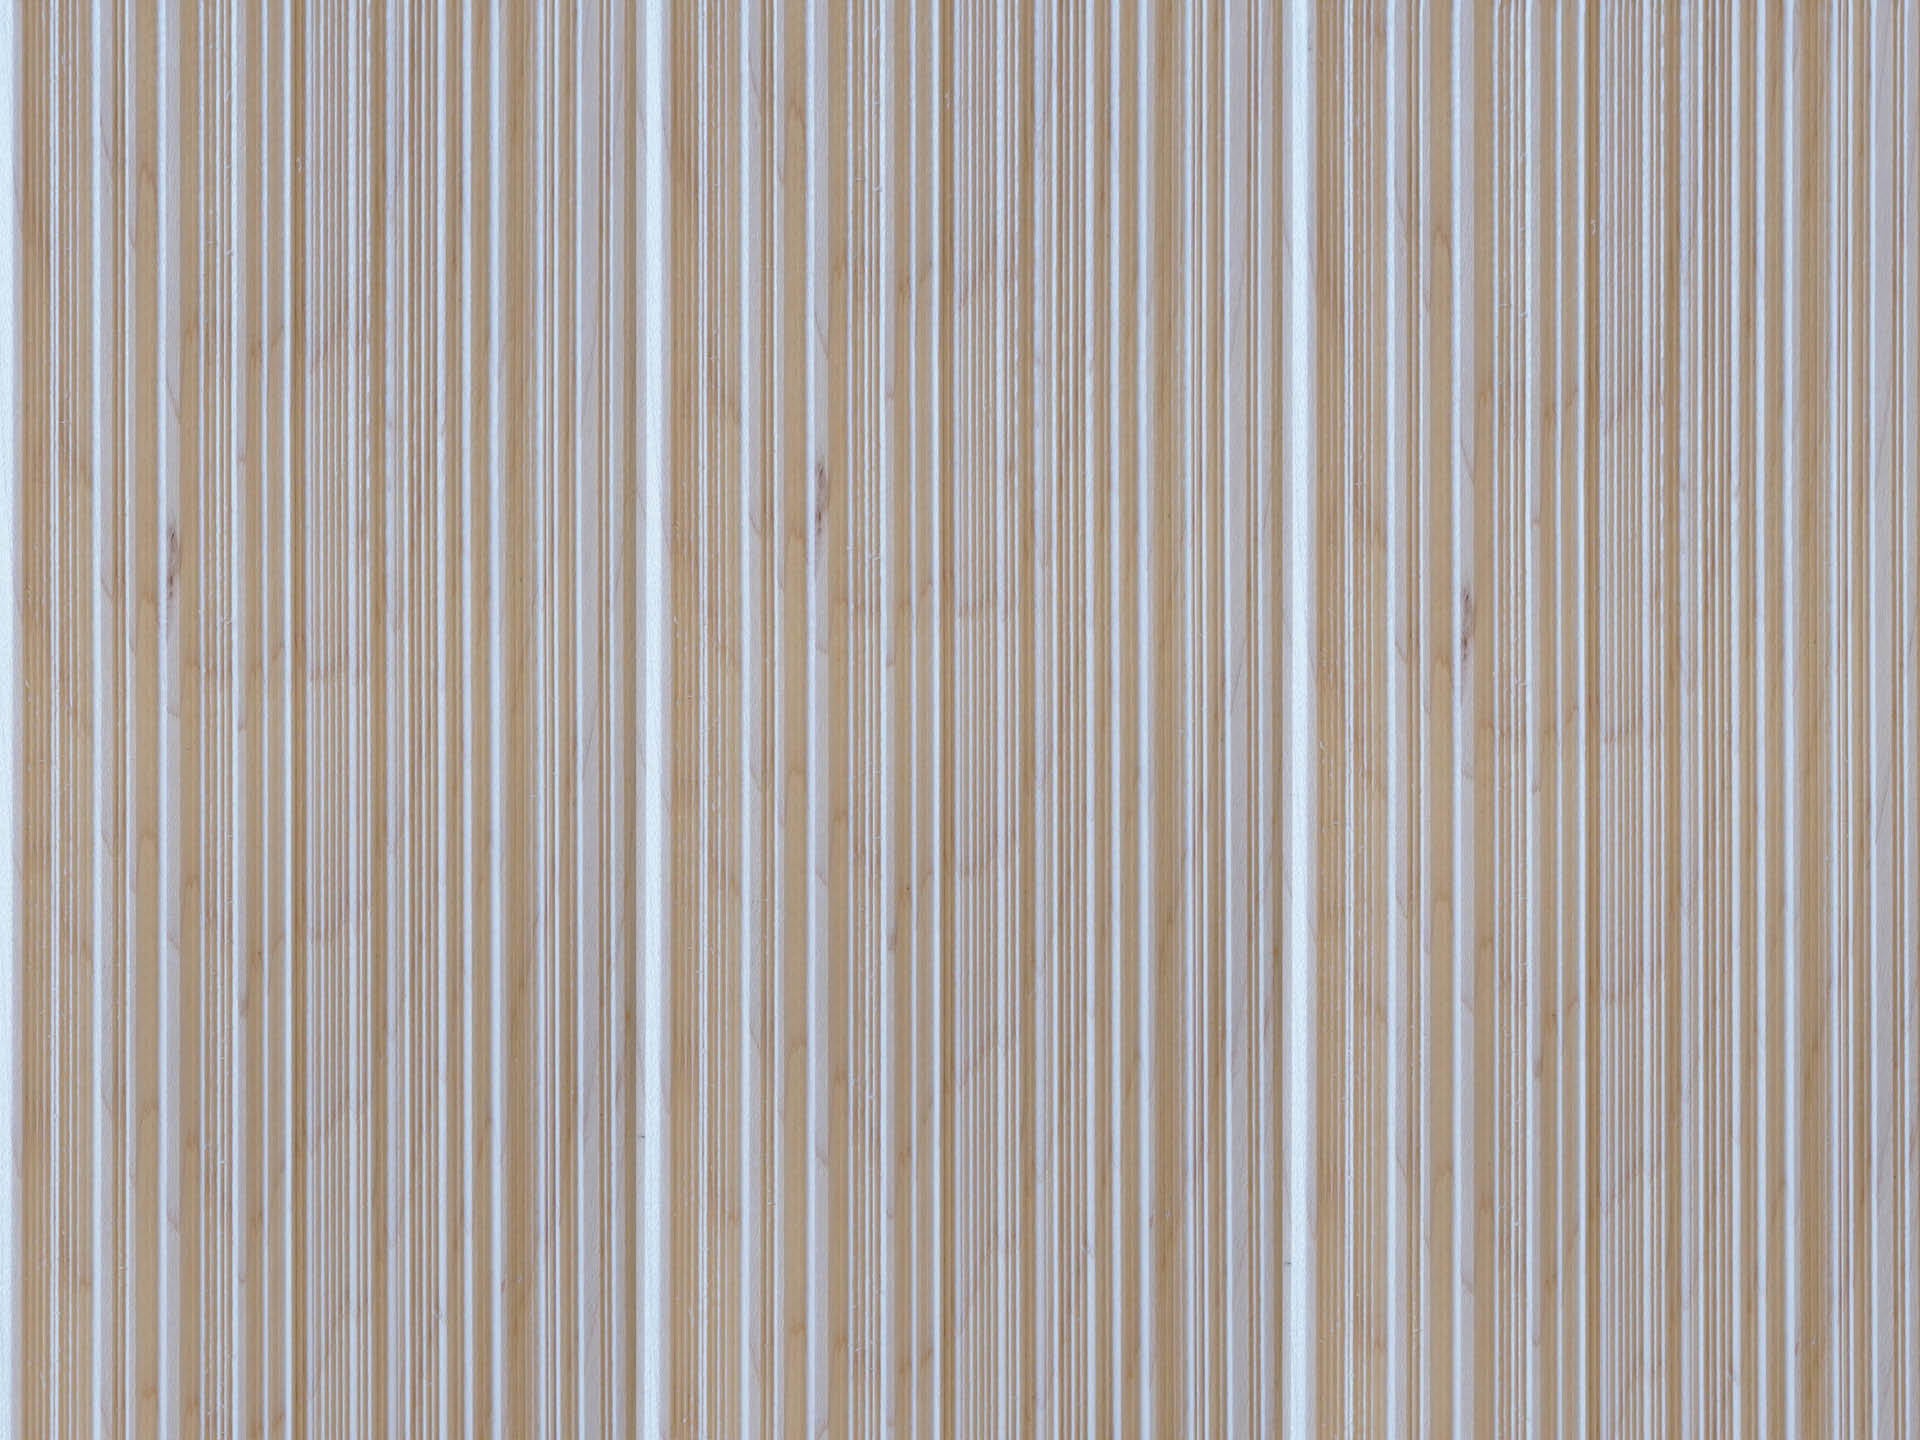 Side by side of Weldtex tongue & groove maple hardwood plank consisting of a combed, striated, brushed wood appearance common in mid-century modern homes and design